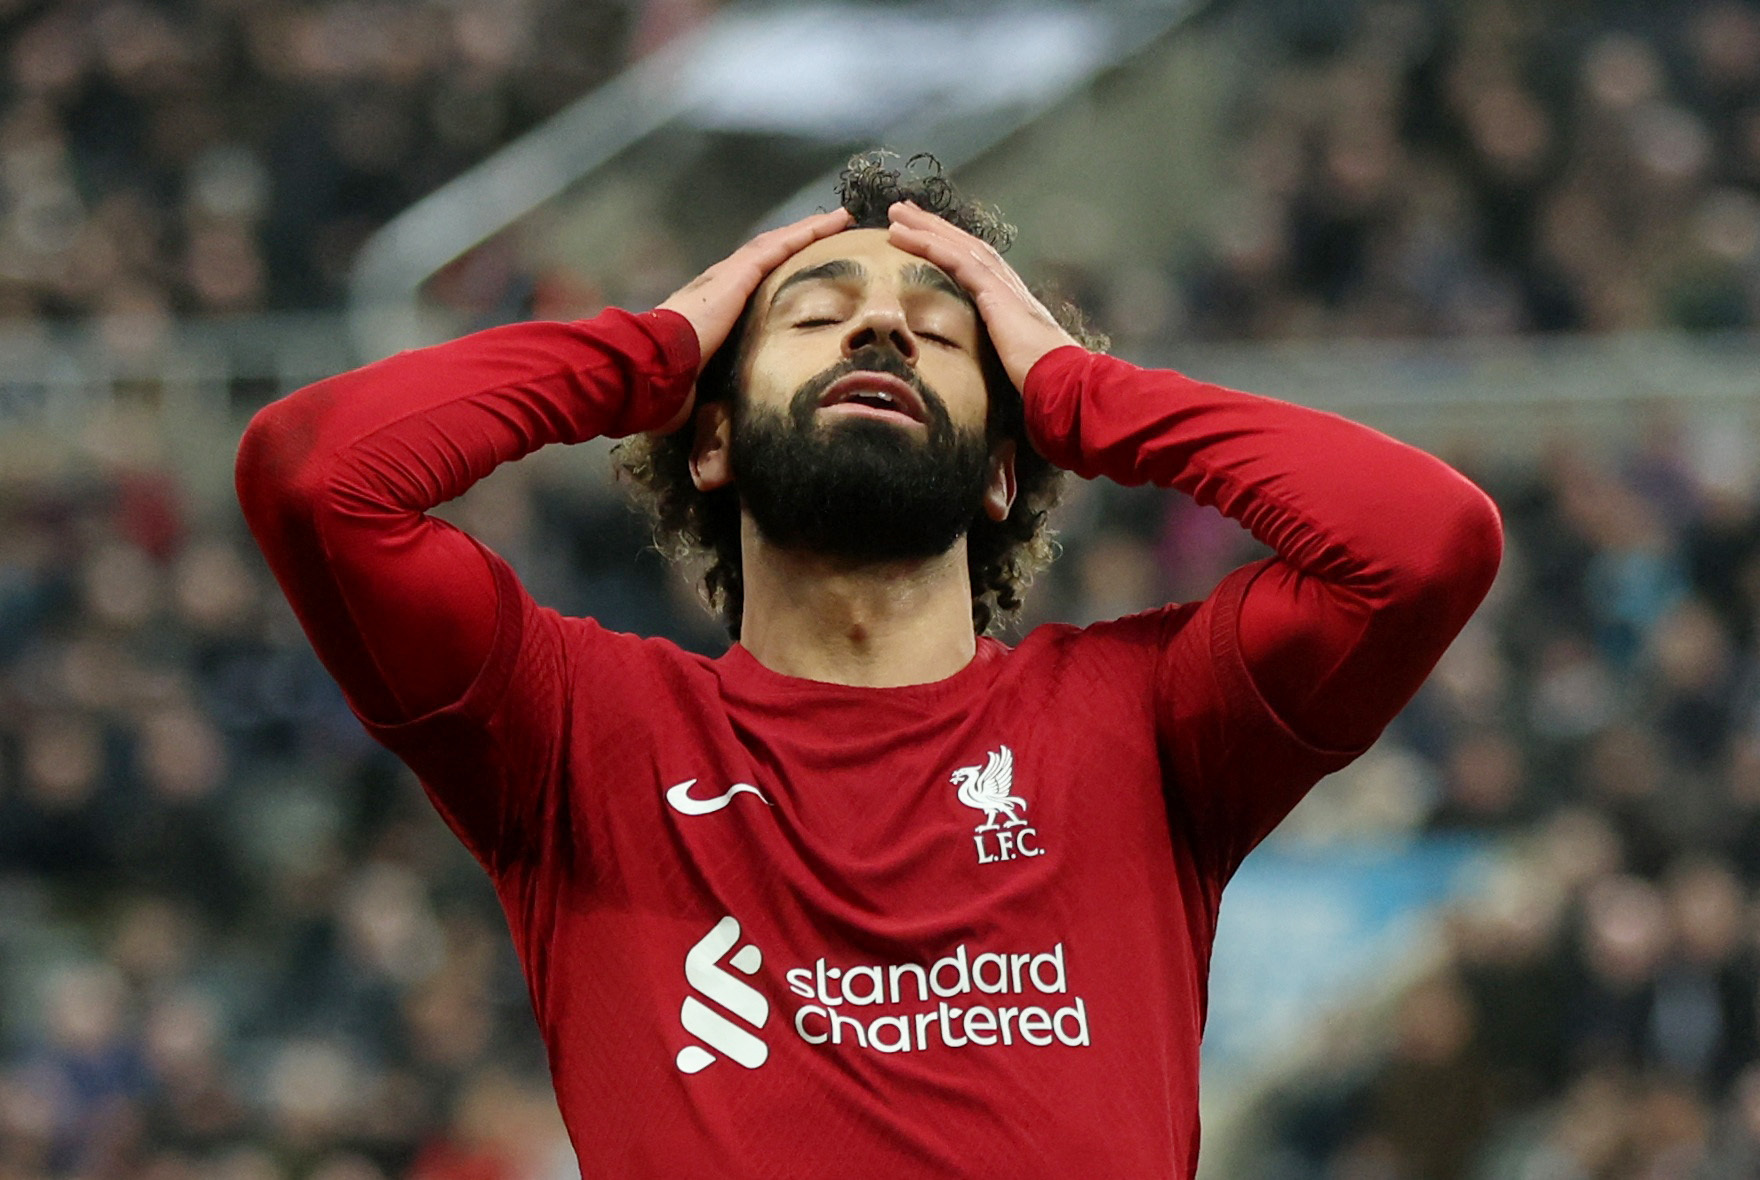 The value of the stolen goods in Salah's mansion in Cairo would amount to almost 430 thousand dollars (Reuters / Lee Smith)